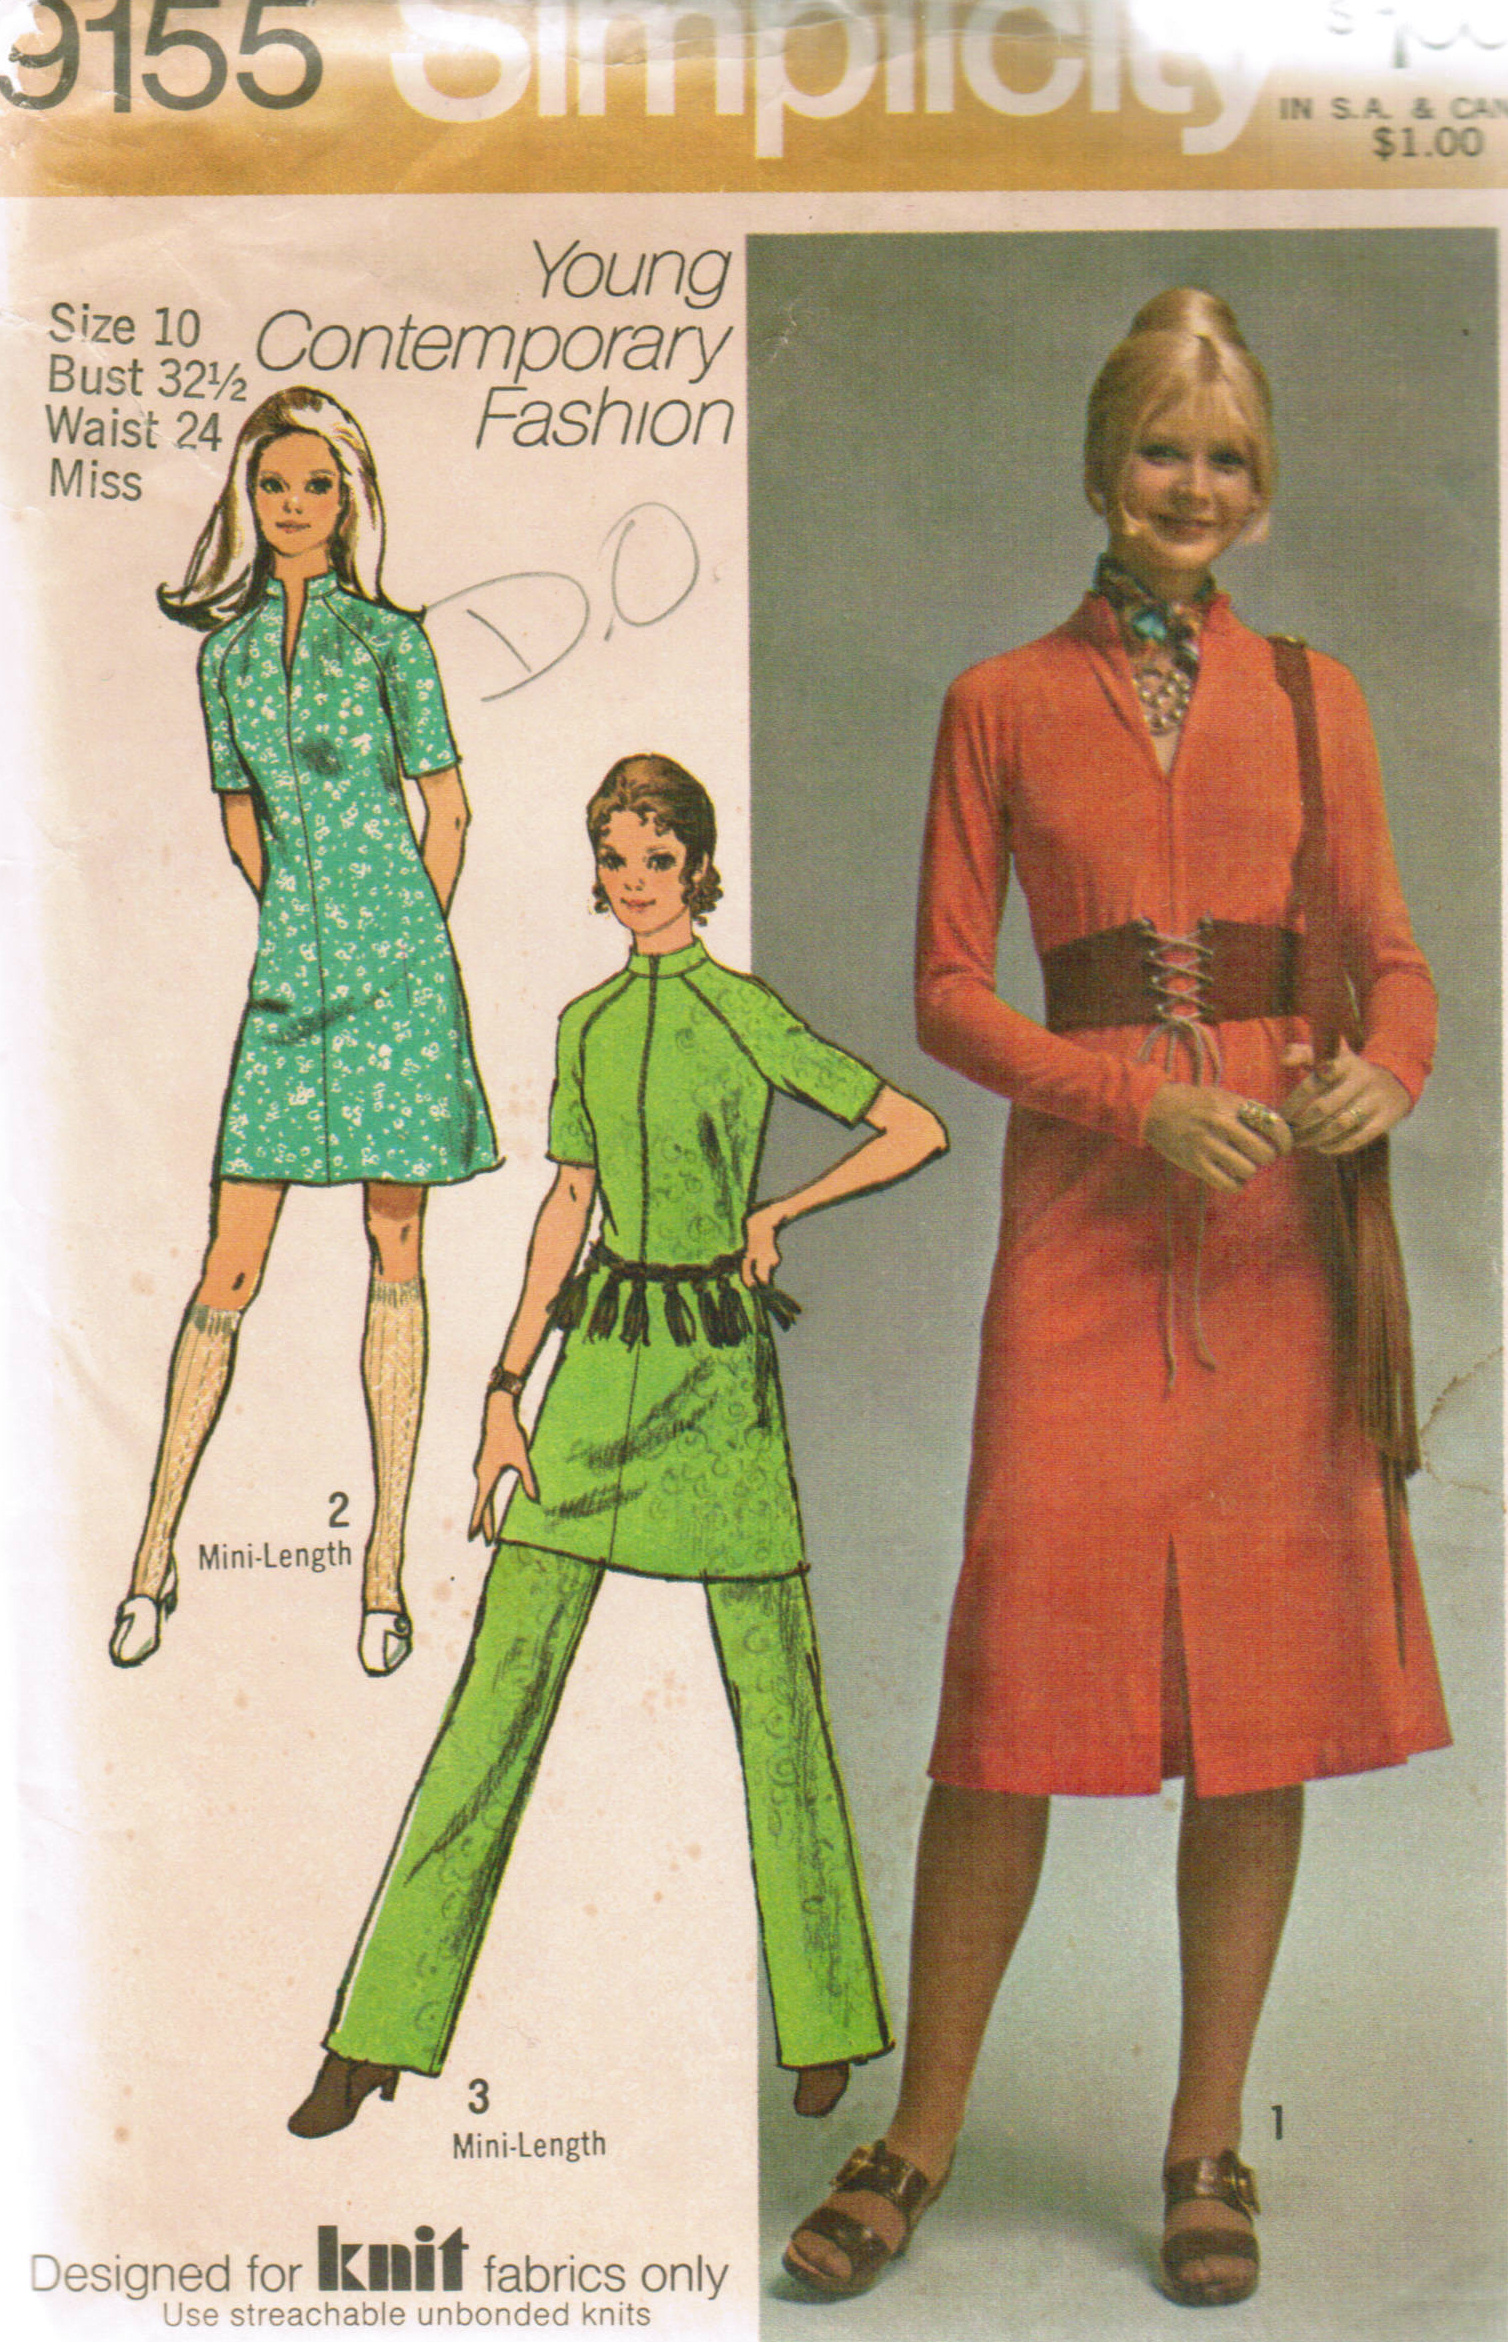 Simplicity 9155 | Vintage Sewing Patterns | FANDOM powered by Wikia